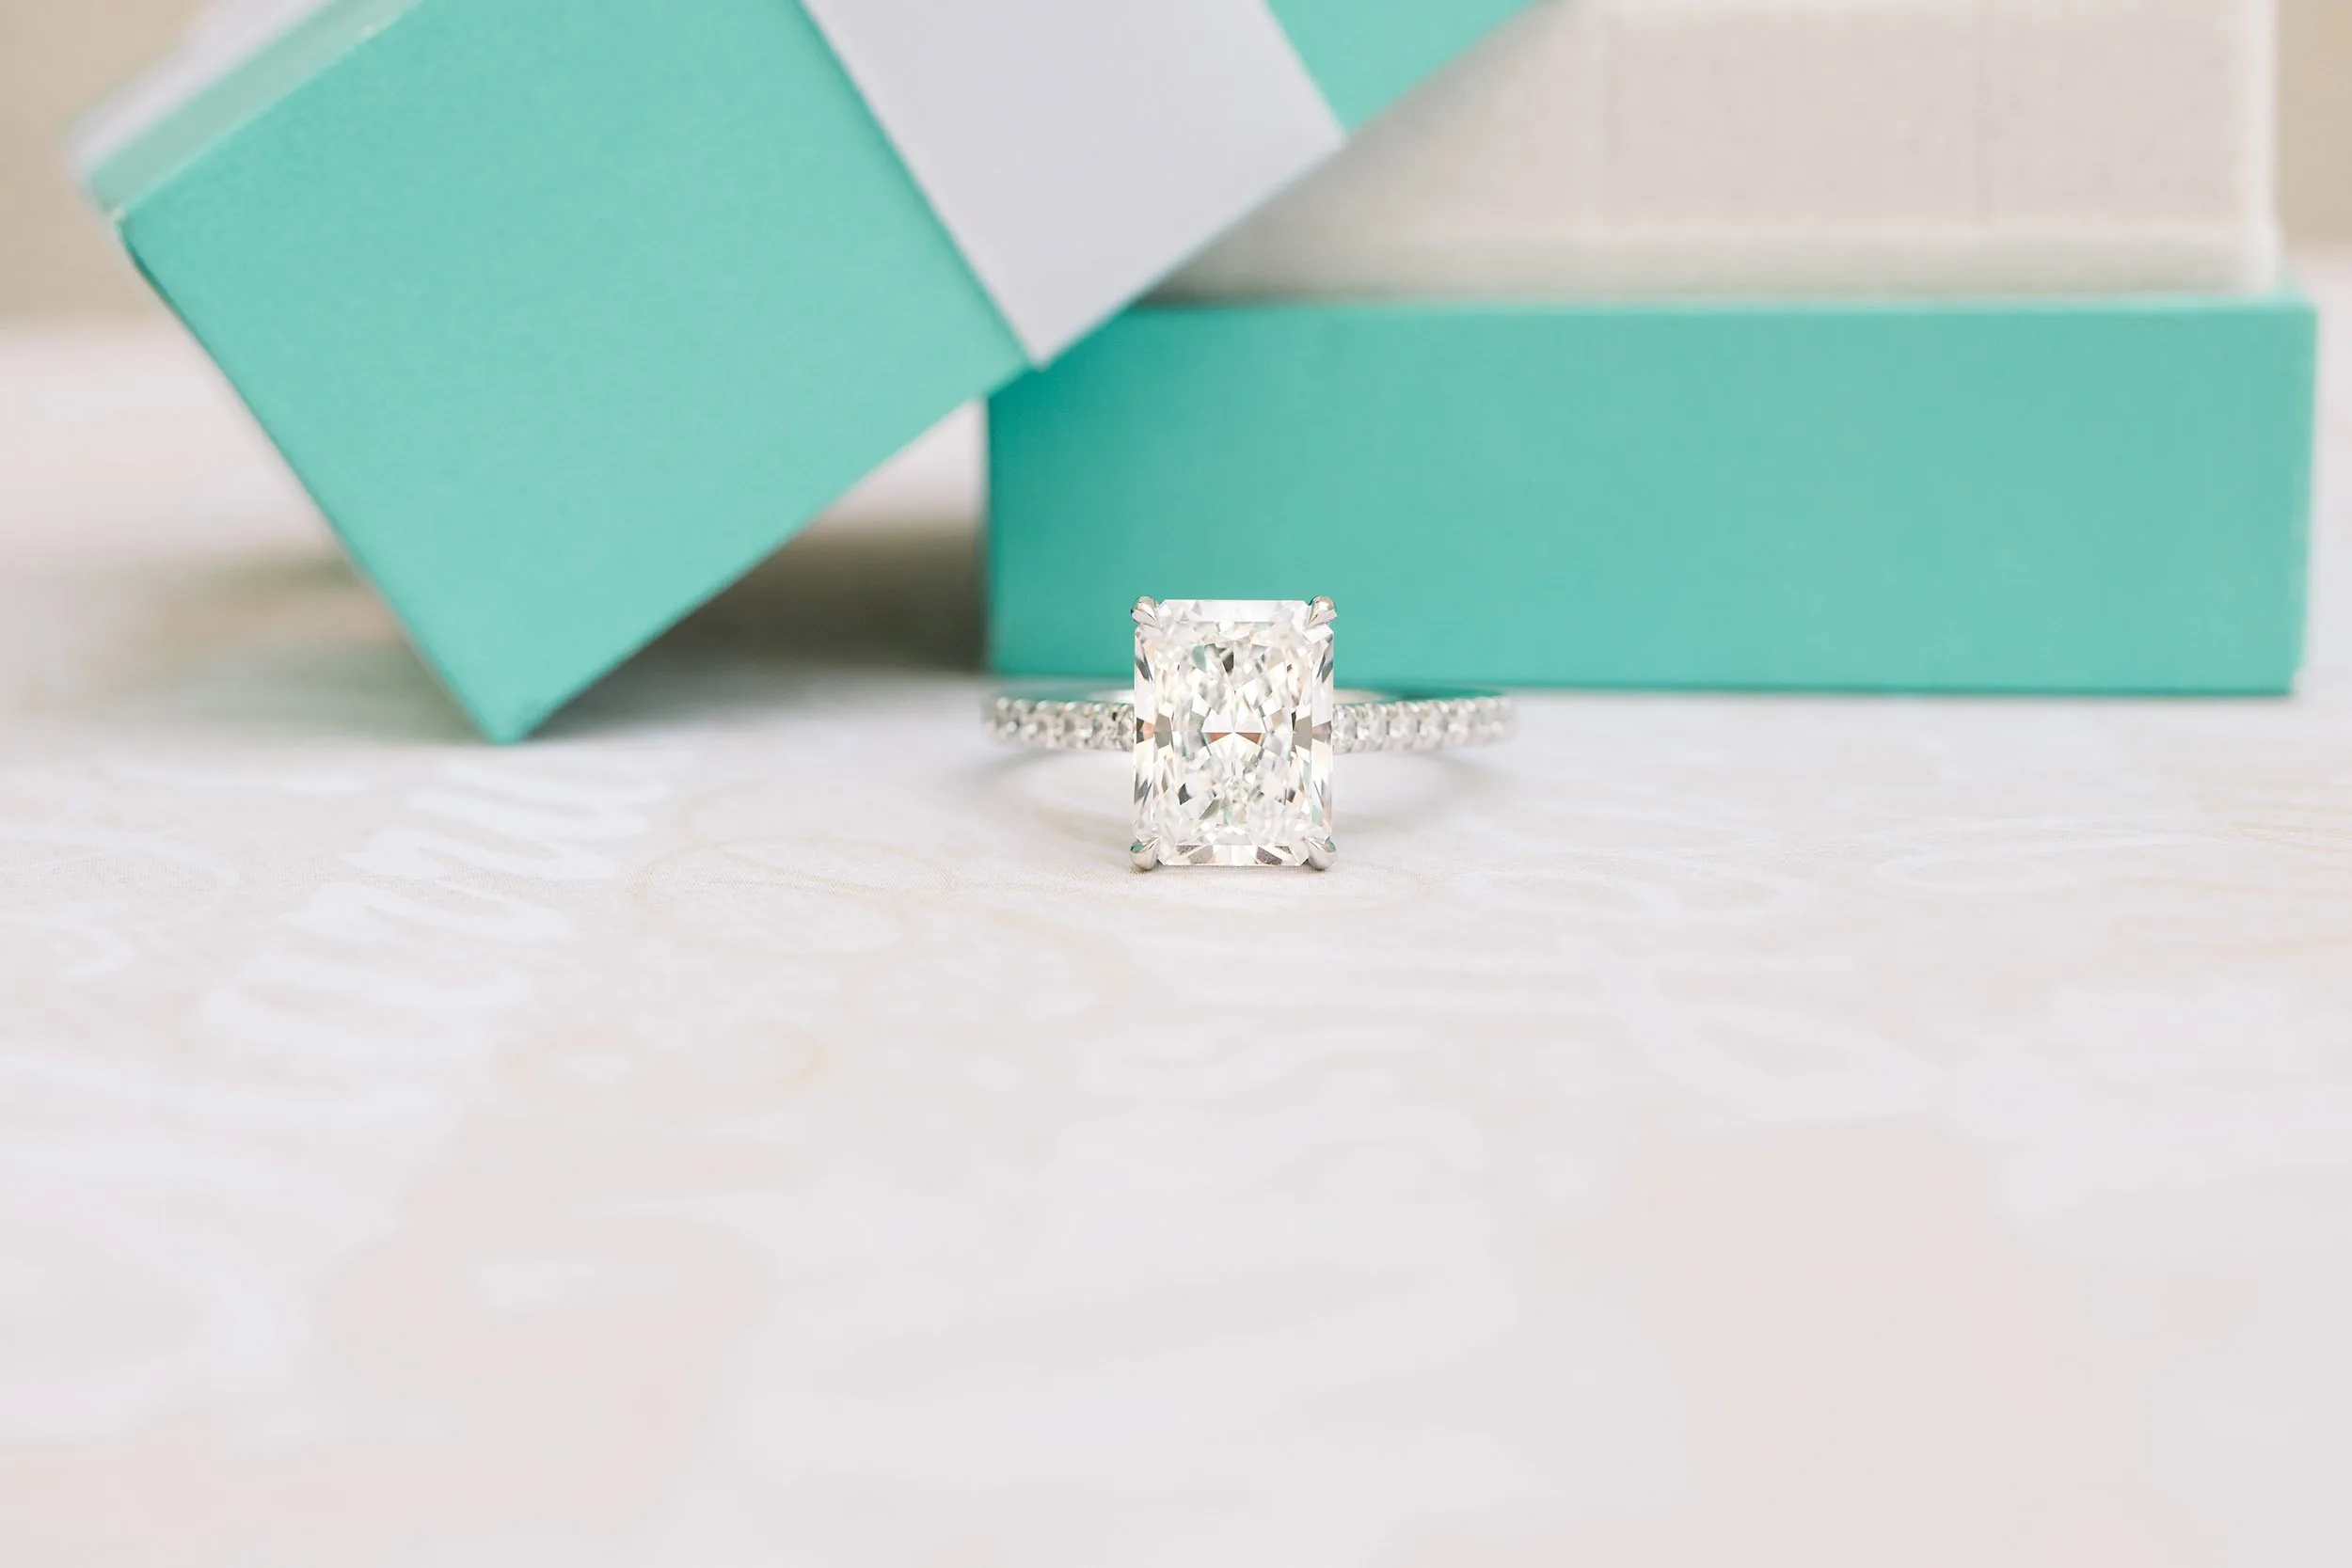 3ct radiant cut in pave setting